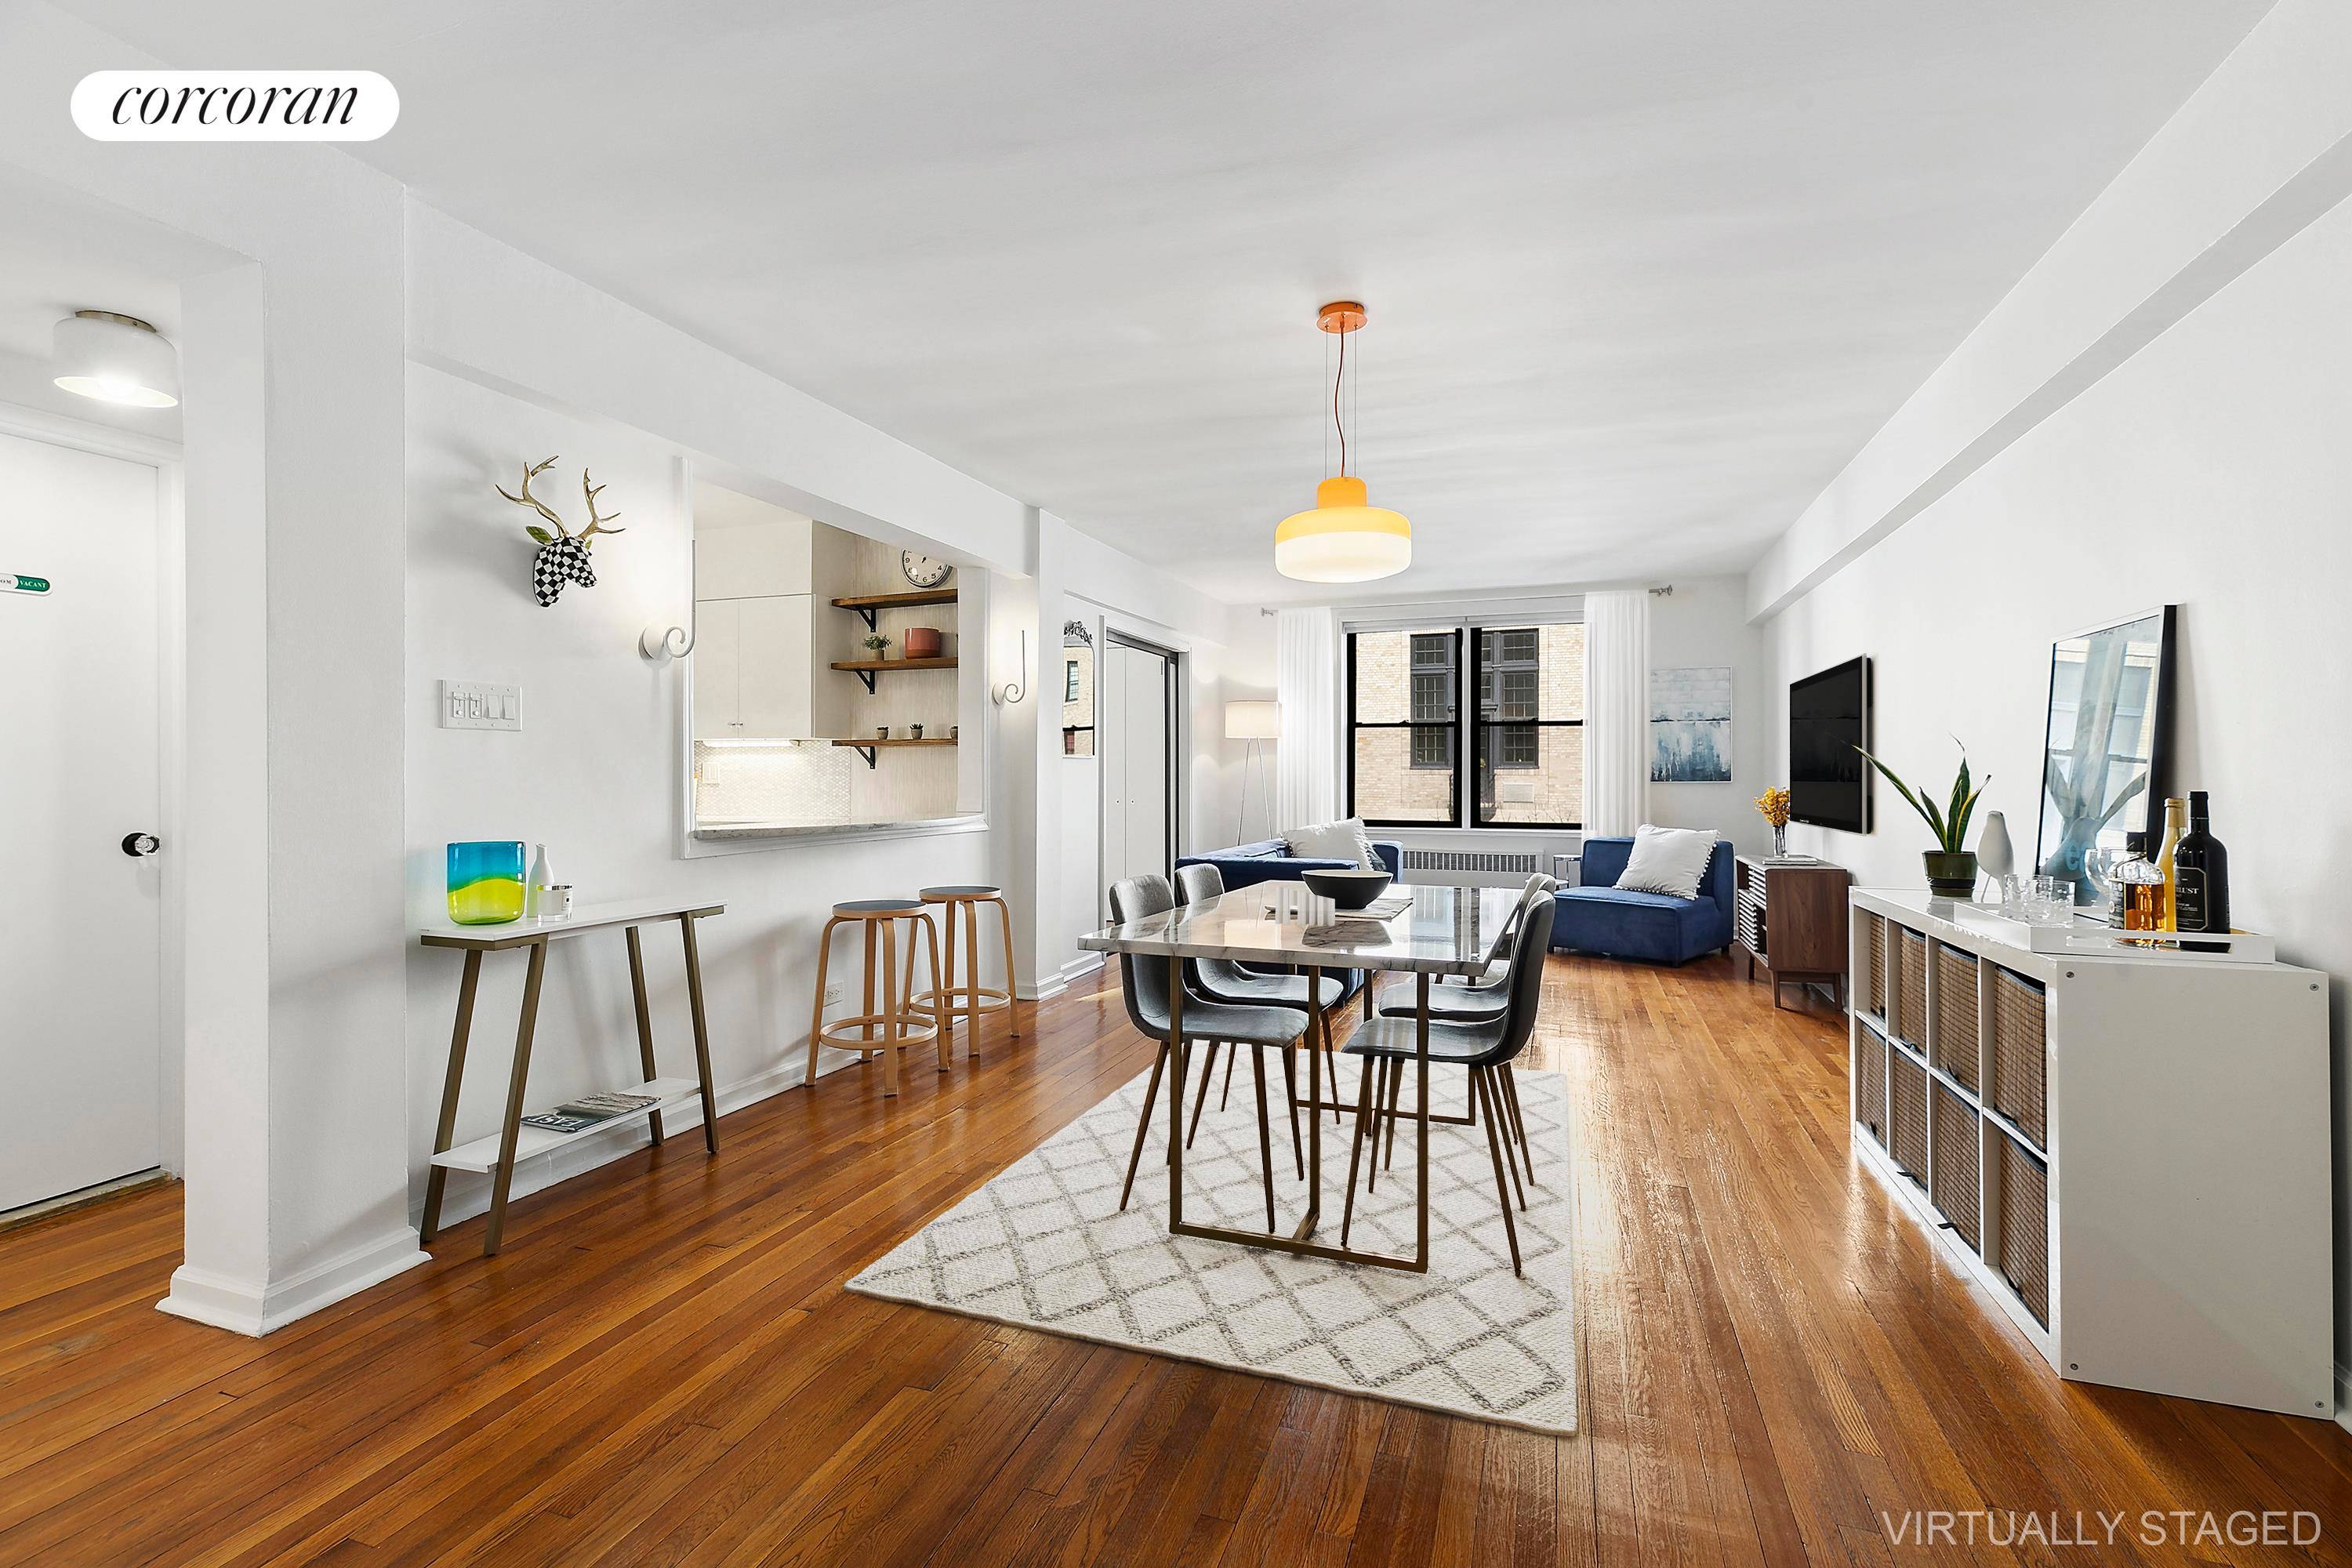 Turn Key ! 30 East 9th Street, 4B is a stylish 2 Bedroom, 1 bath converted from a XL 1BR Dining Alcove at The Lafayette has been reimagined and is ...